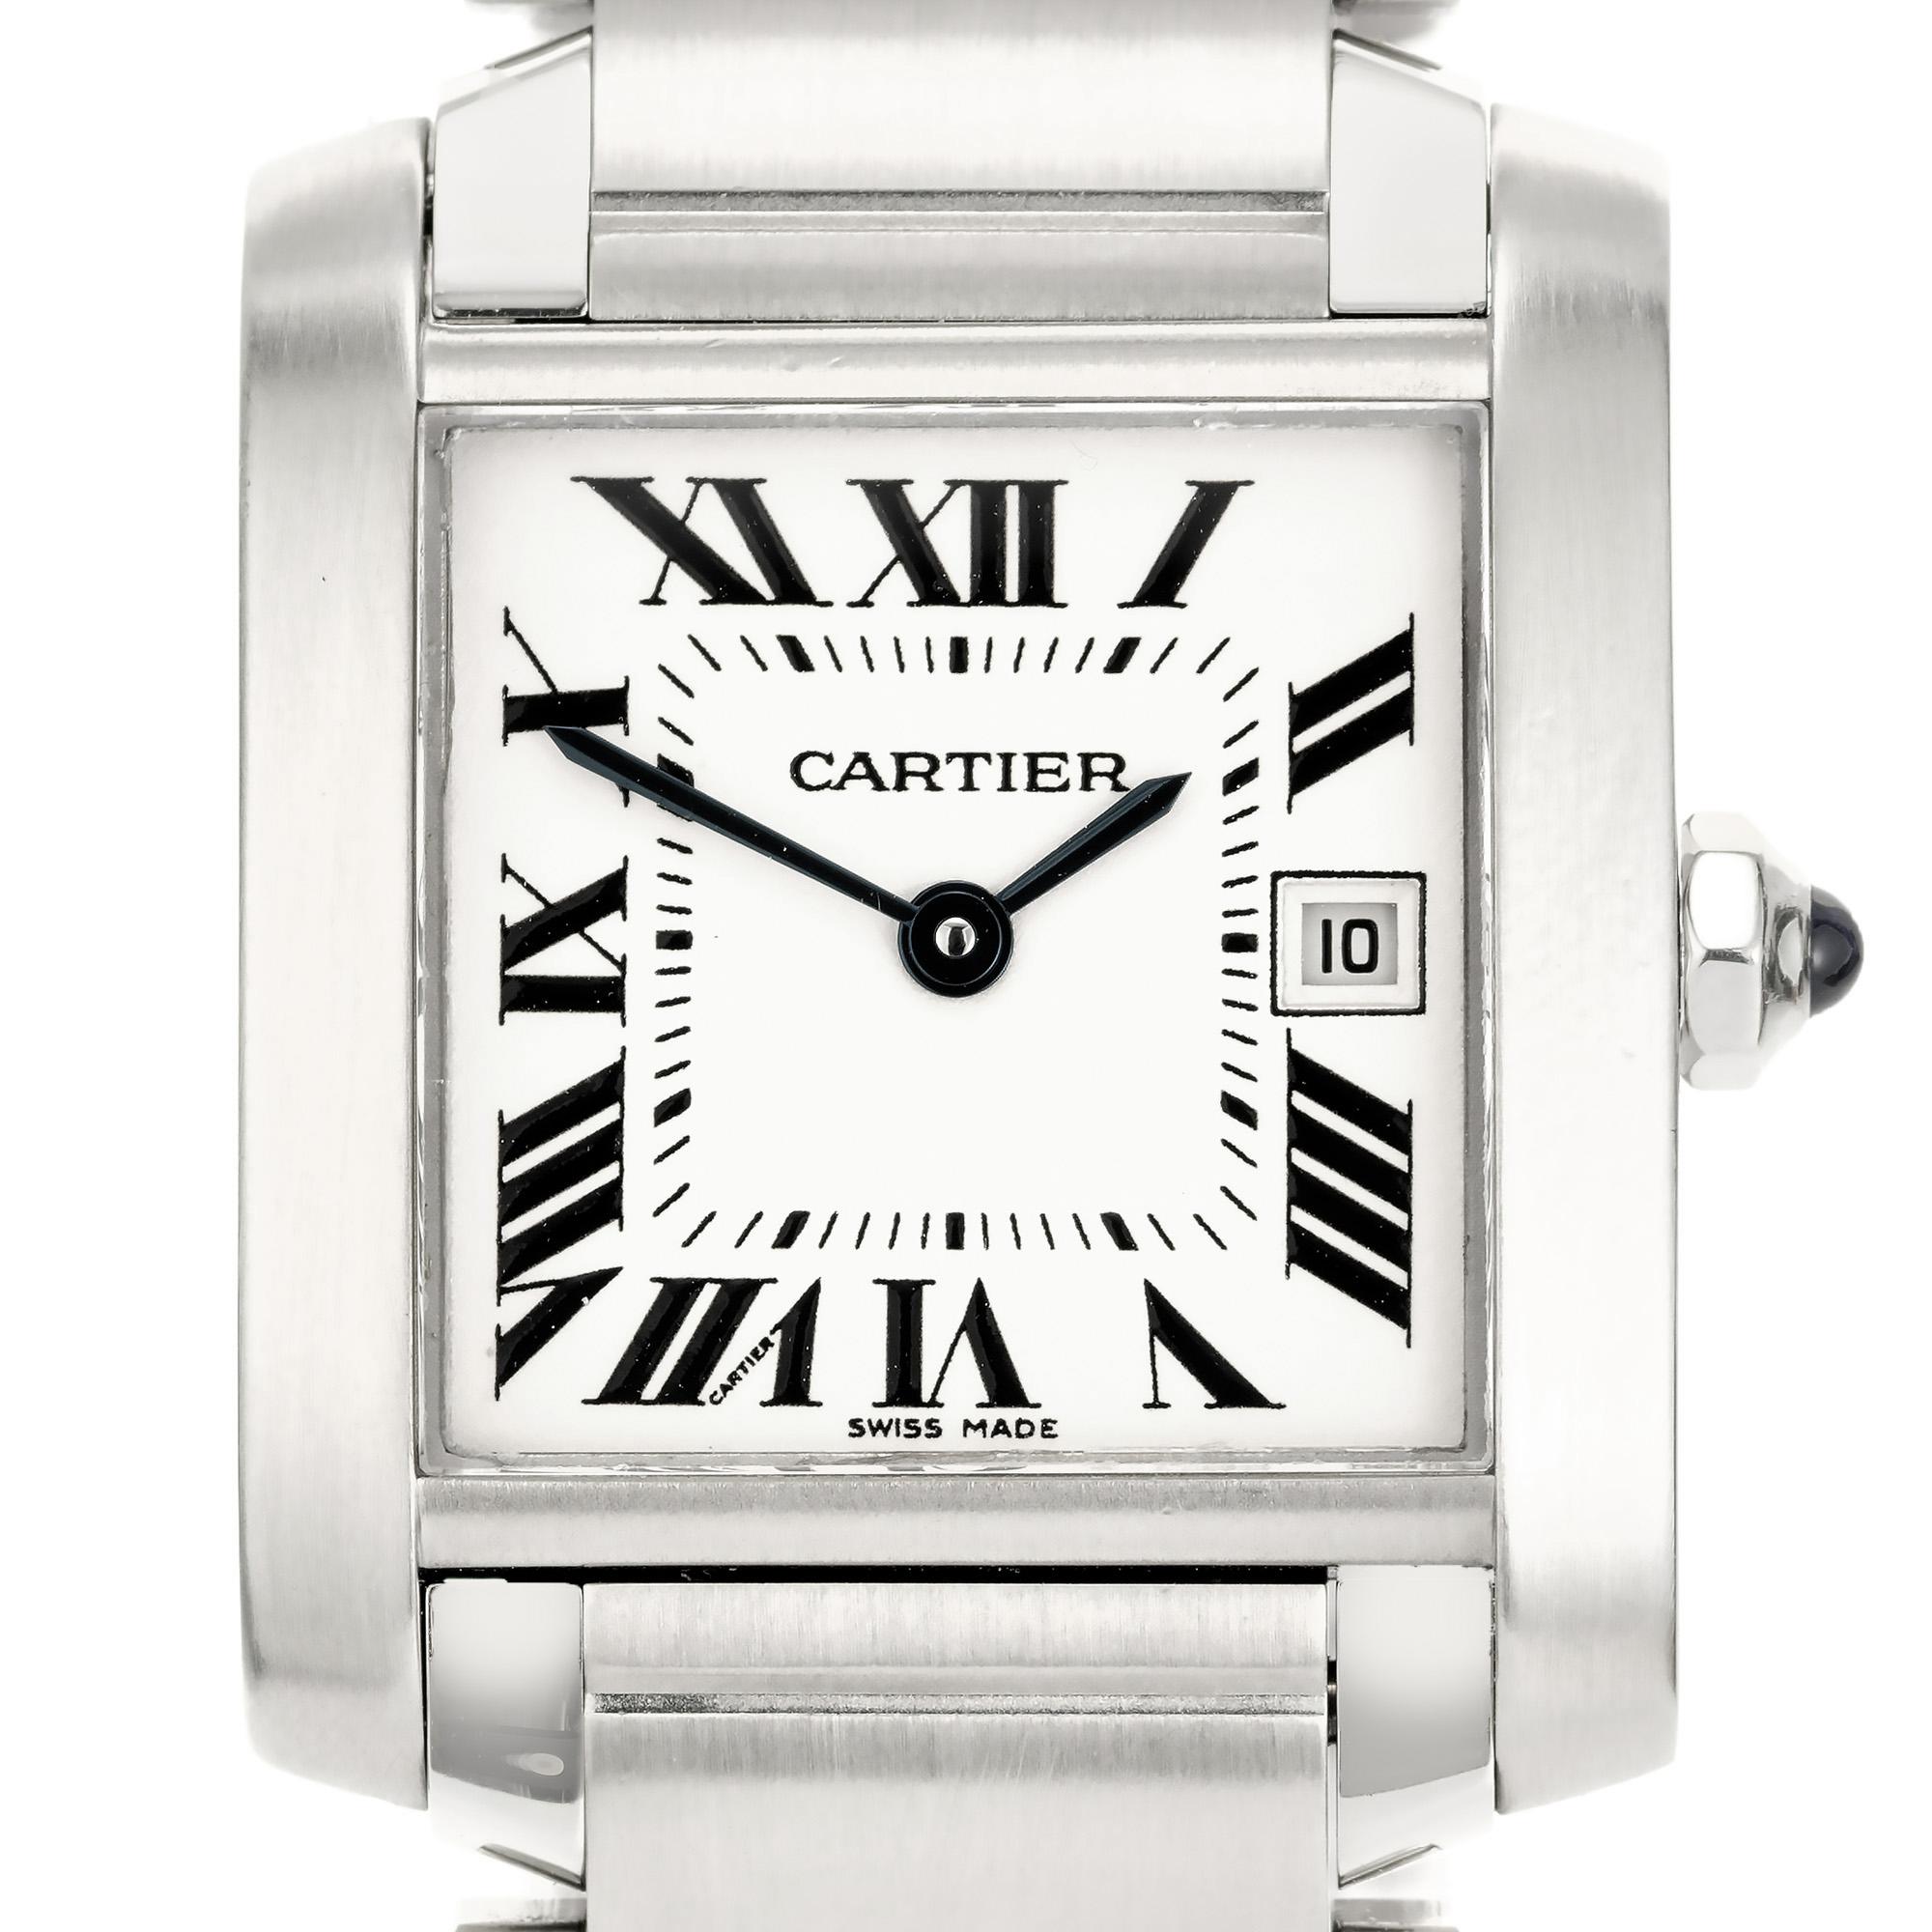 Classic Cartier steel Francaise tank Date wristwatch. White parchment square dial with black Roman Numerals. Stainless steel. Blue steel hour hands with a Date calendar window at 3 o'clock. Recently serviced and polished. 

Length: 30mm
Width: